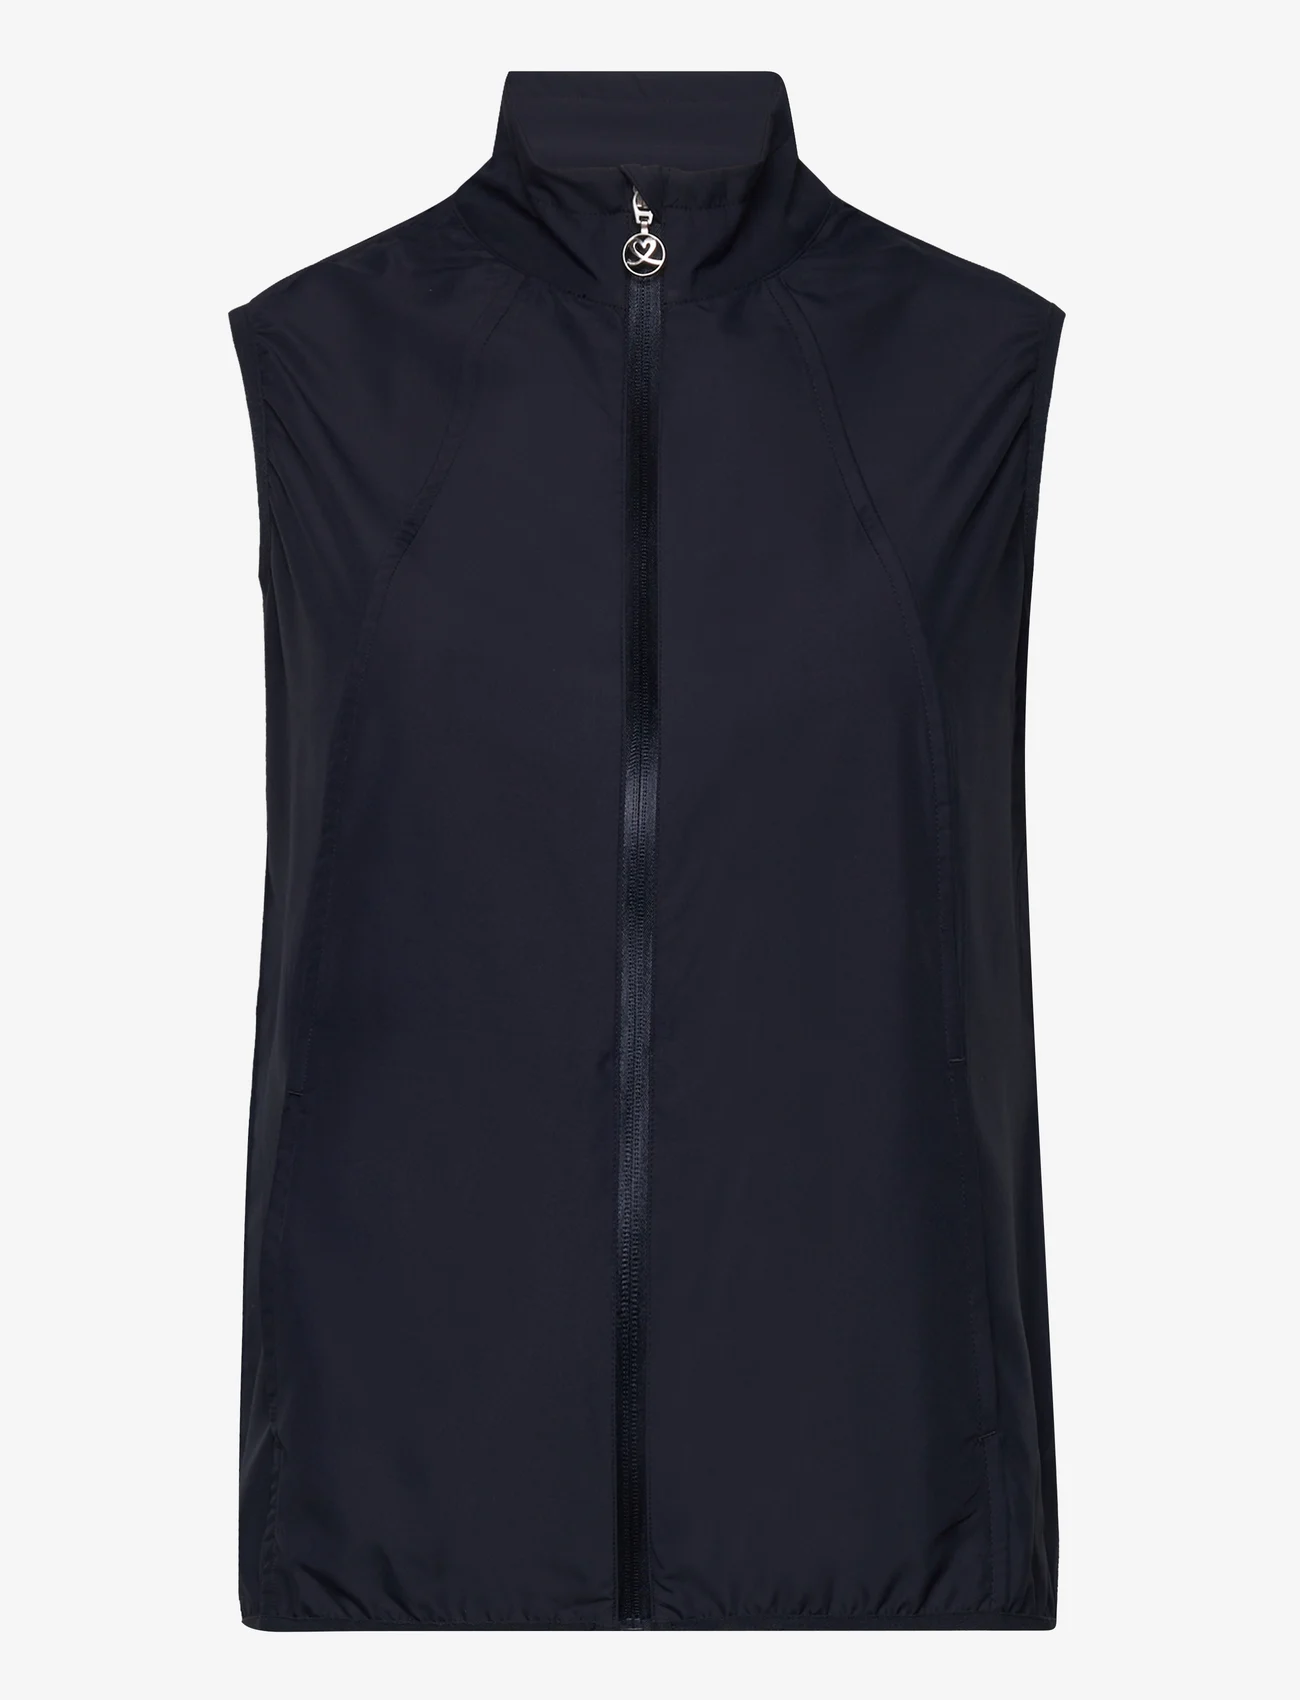 Daily Sports - MIA WIND VEST - dunveste - navy - 0